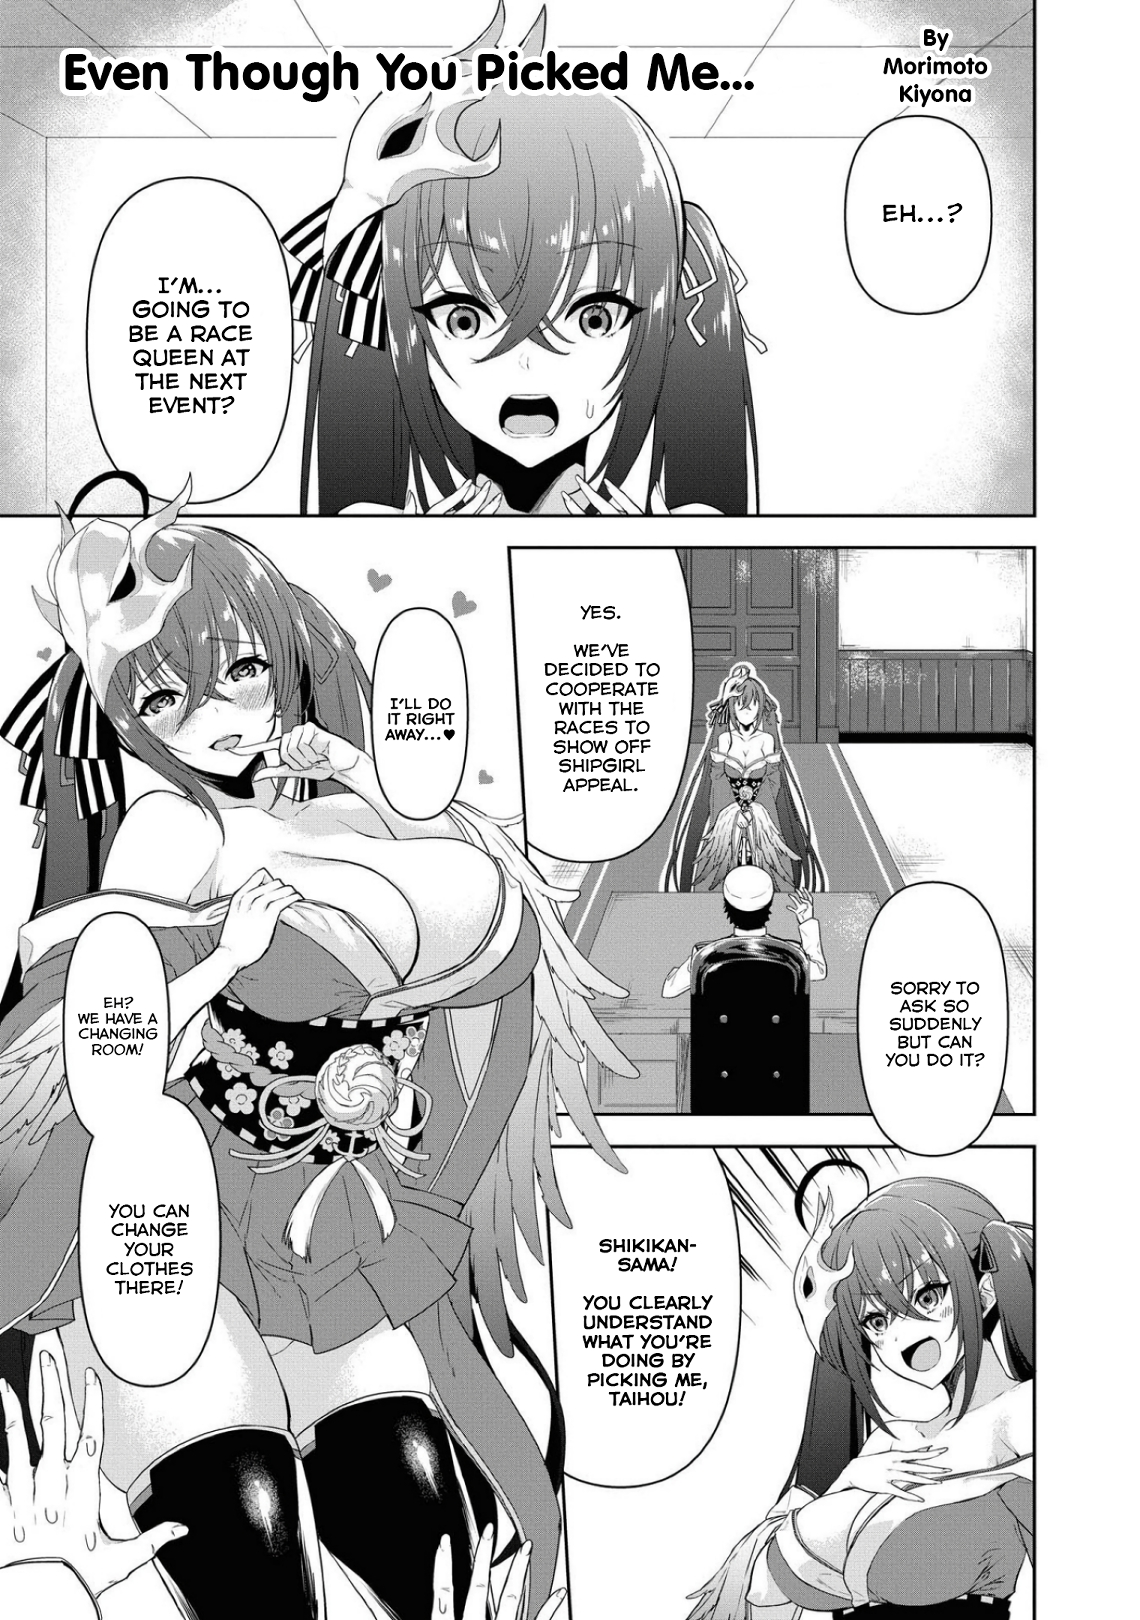 Azur Lane Comic Anthology Breaking!! 27 Even Though You Picked Me...